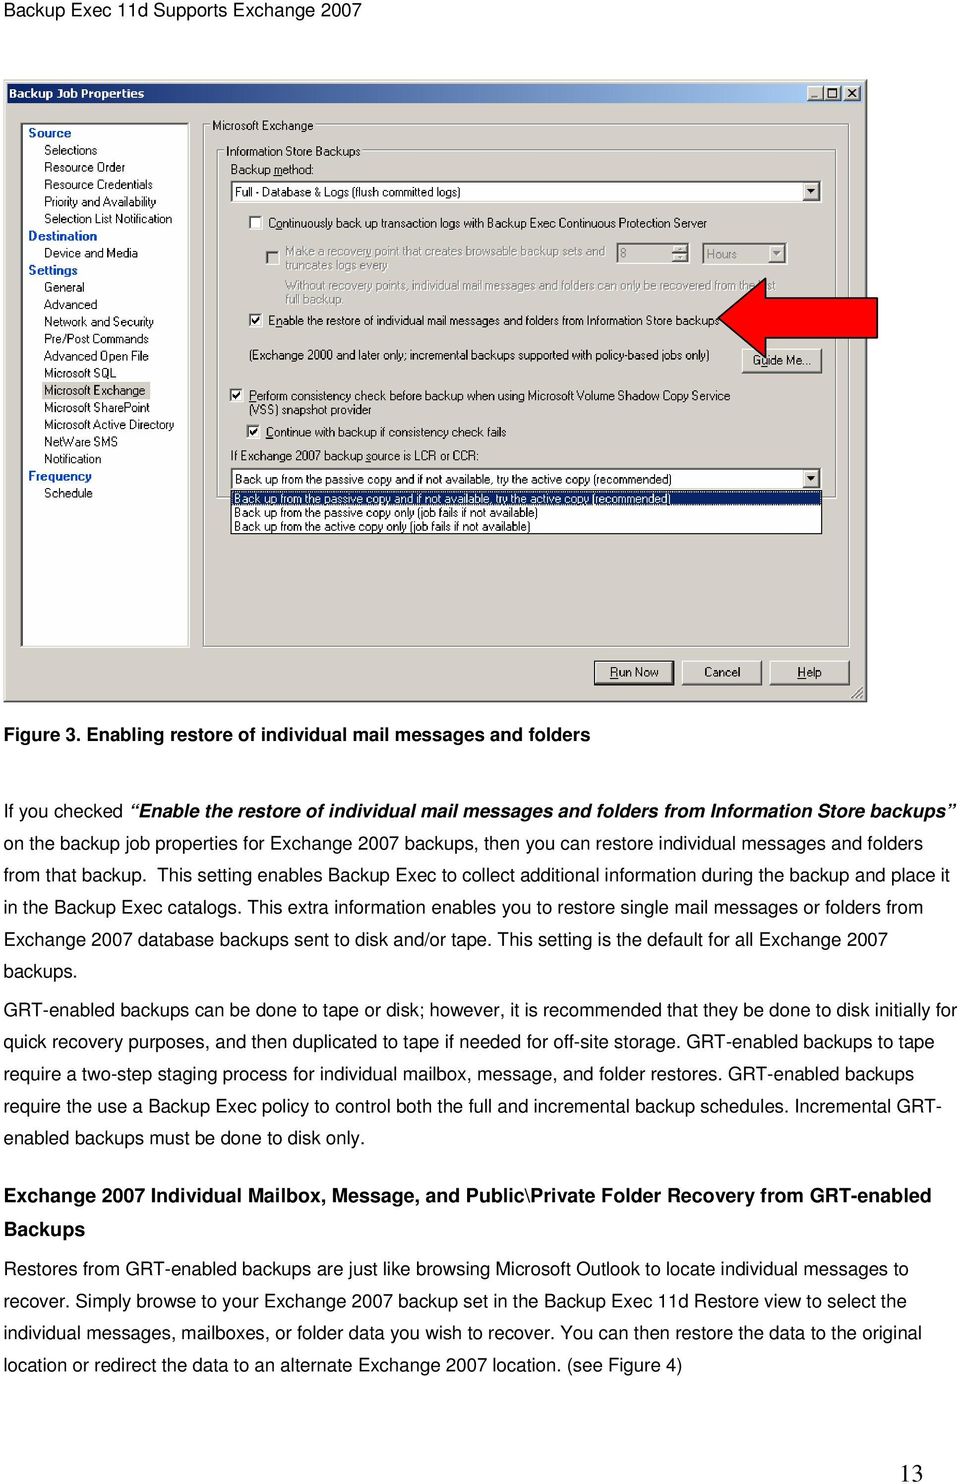 Exchange 2007 backups, then you can restore individual messages and folders from that backup.